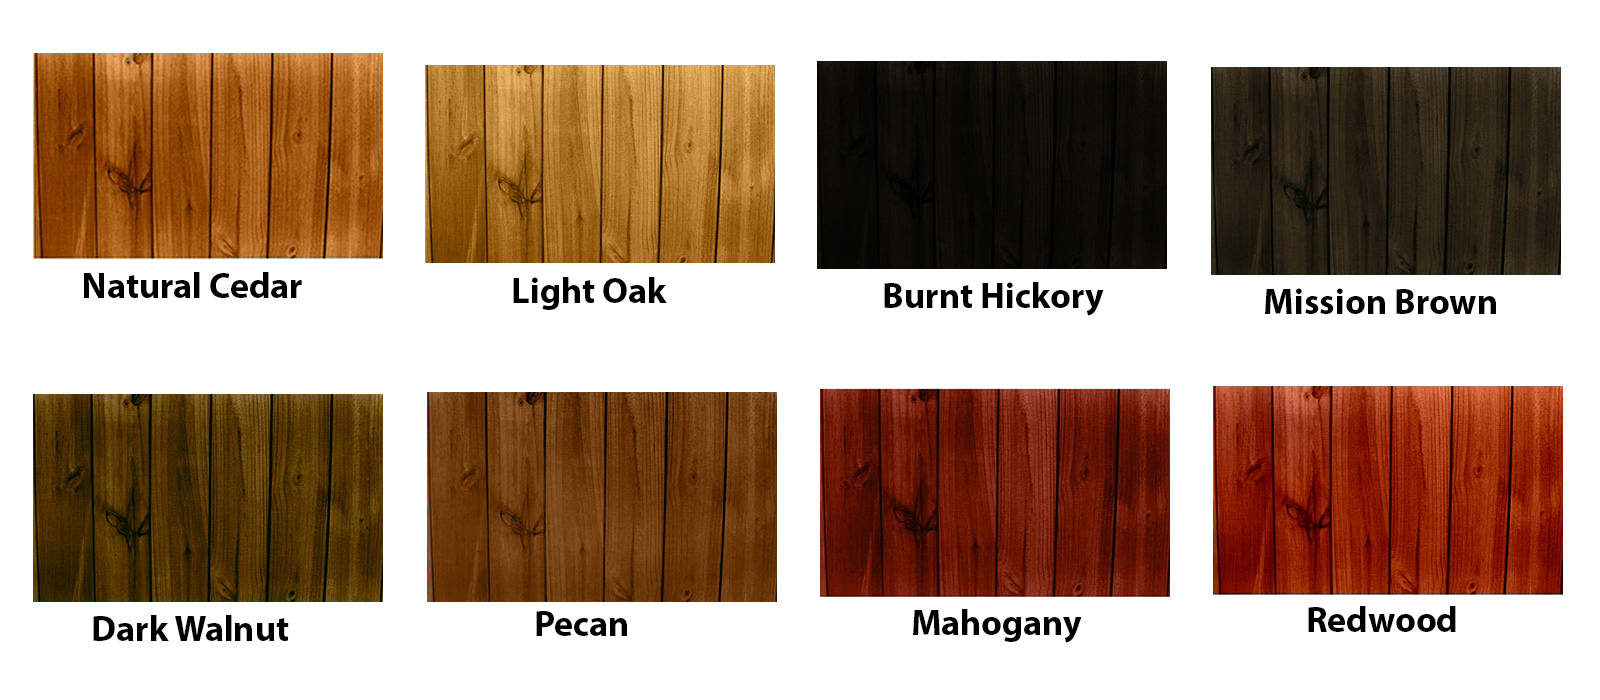 Top 8 Deck Stain Colors Homeluf Com, What Is The Best Outdoor Stain